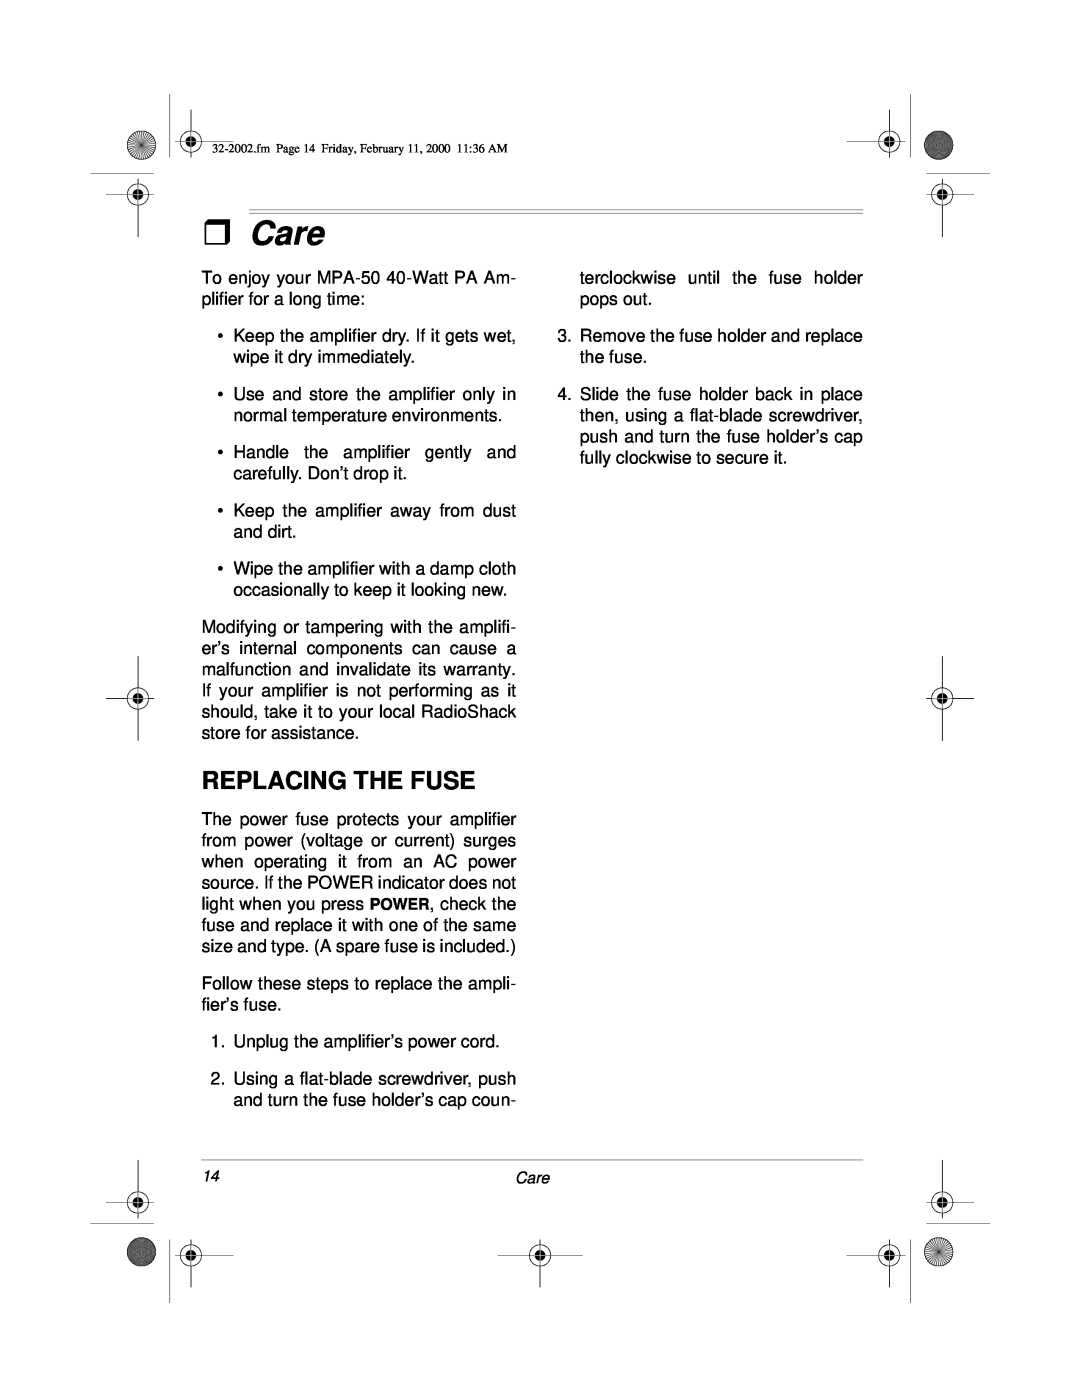 Radio Shack MPA-50 owner manual ˆCare, Replacing The Fuse 